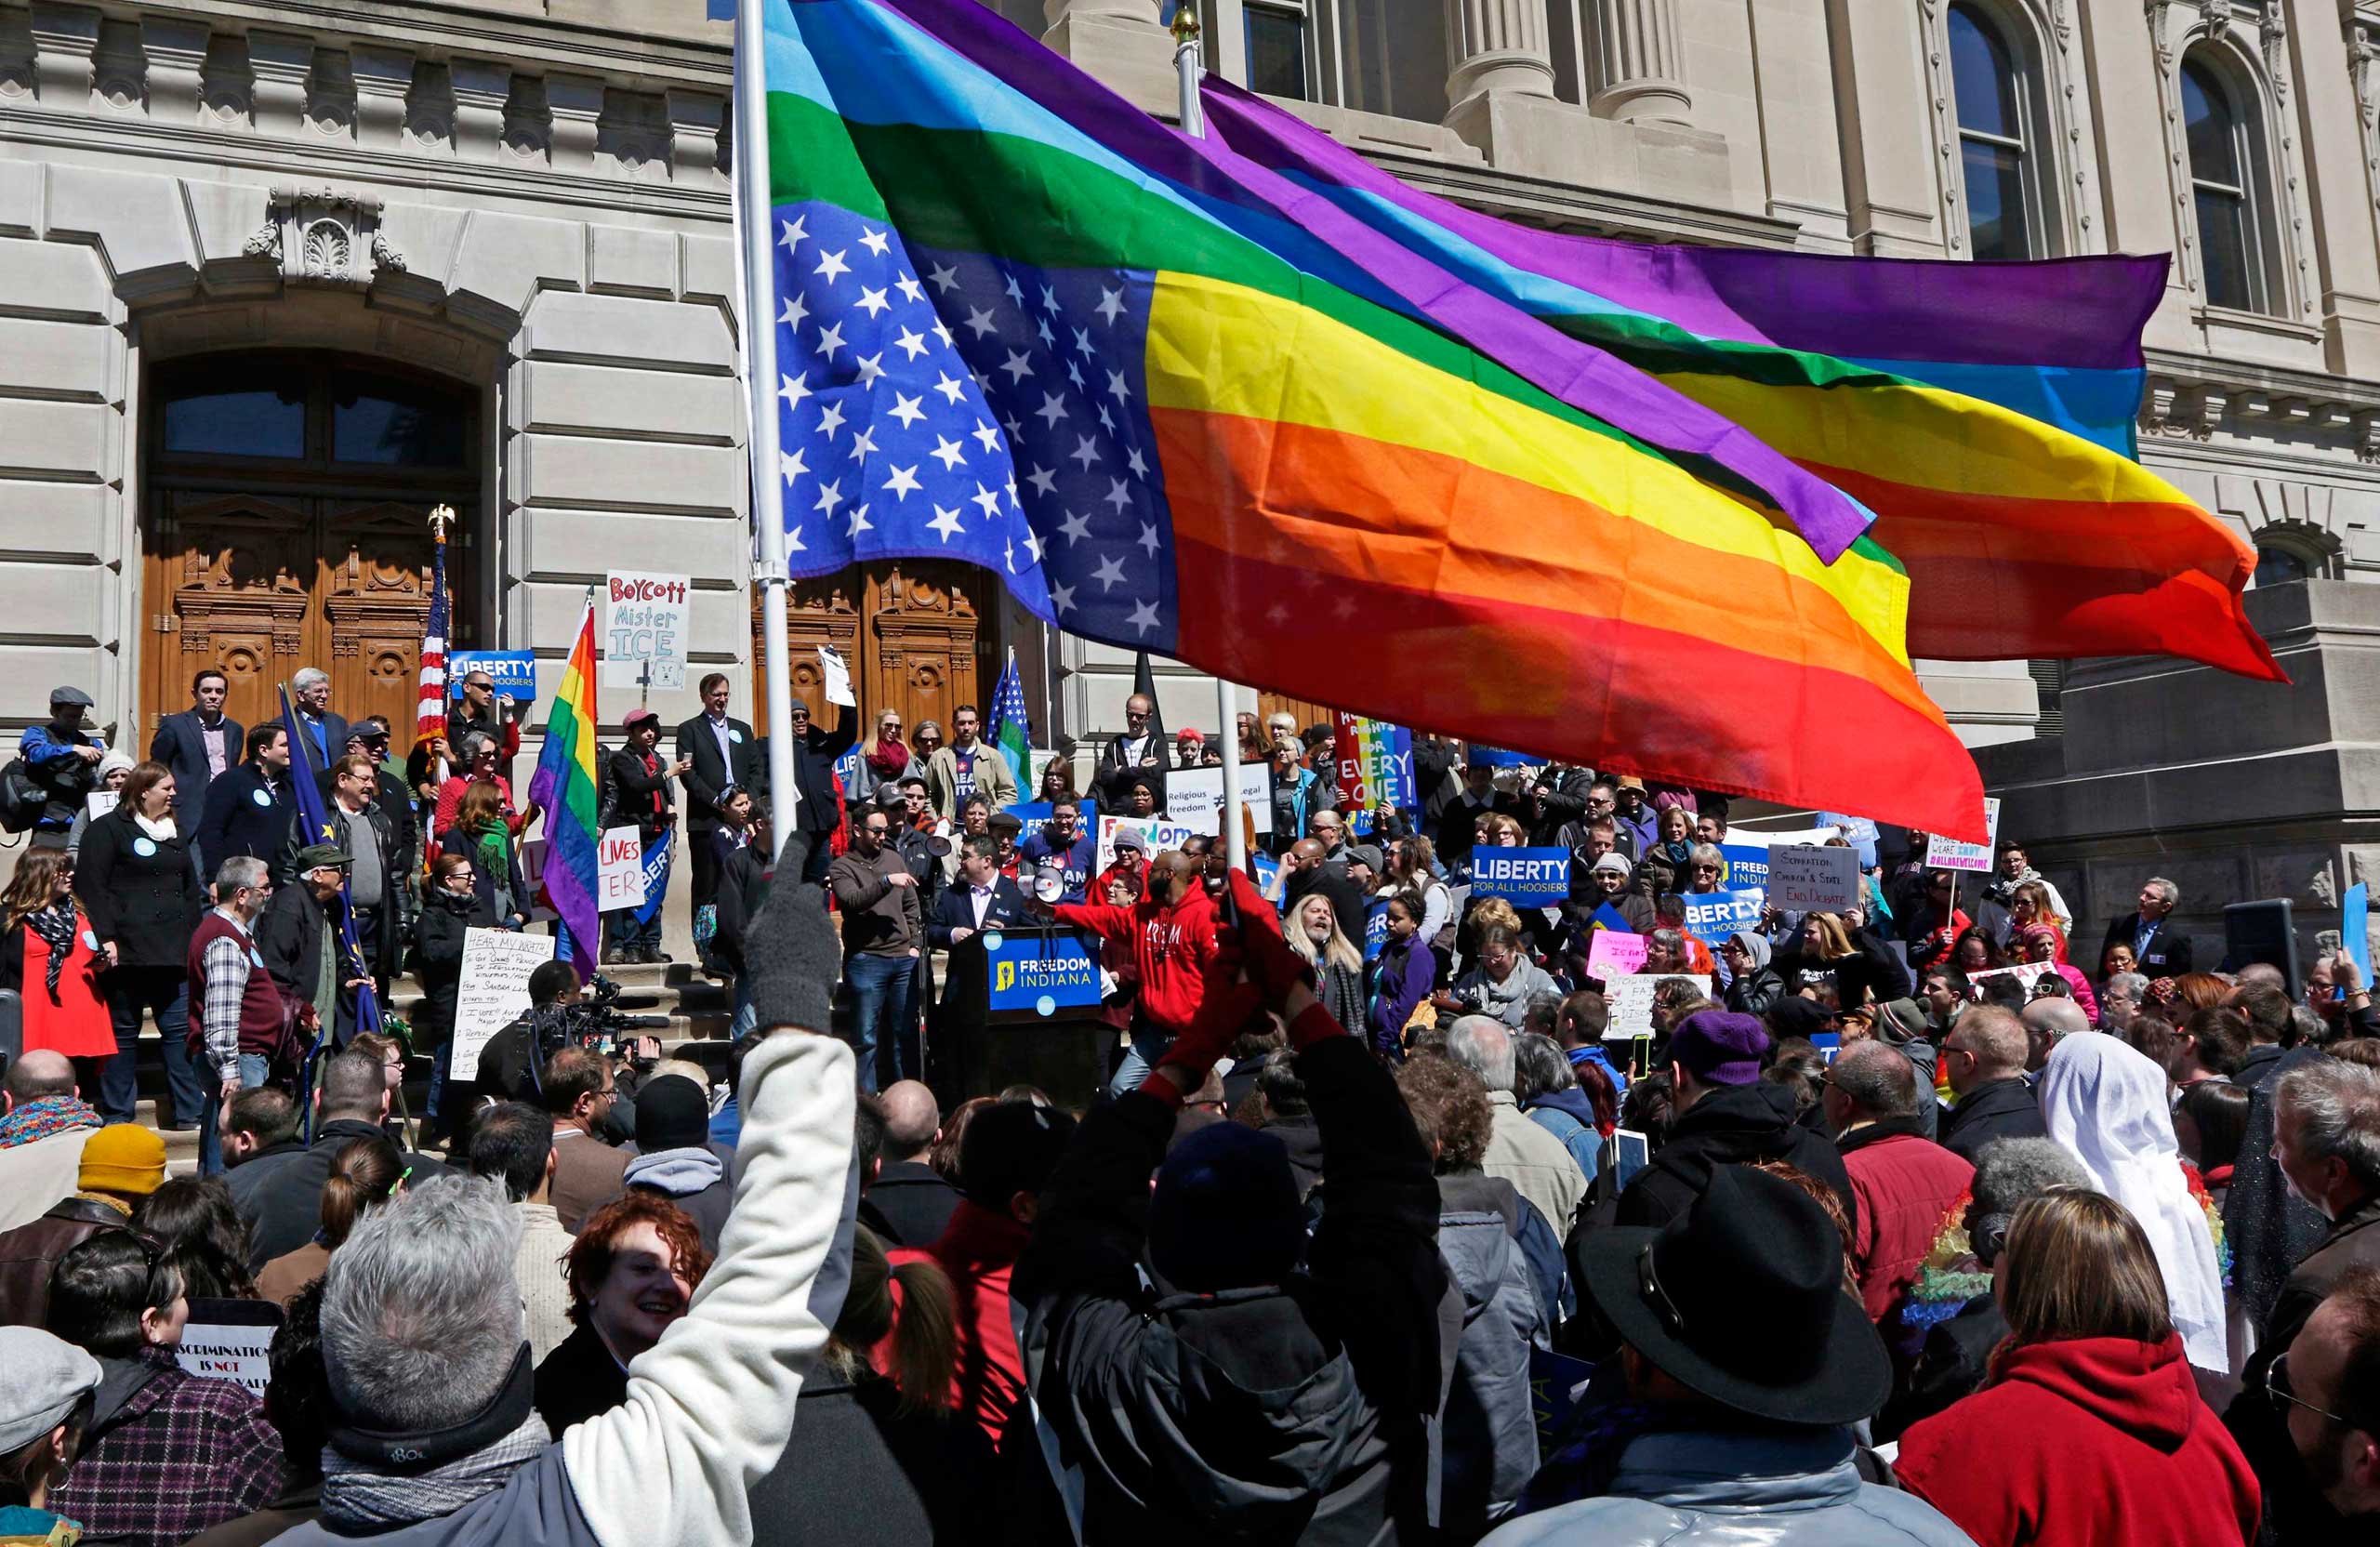 Demonstrators gather to protest a controversial religious freedom bill recently signed by Governor Mike Pence, during a rally at Monument Circle in Indianapolis on March 28, 2015.